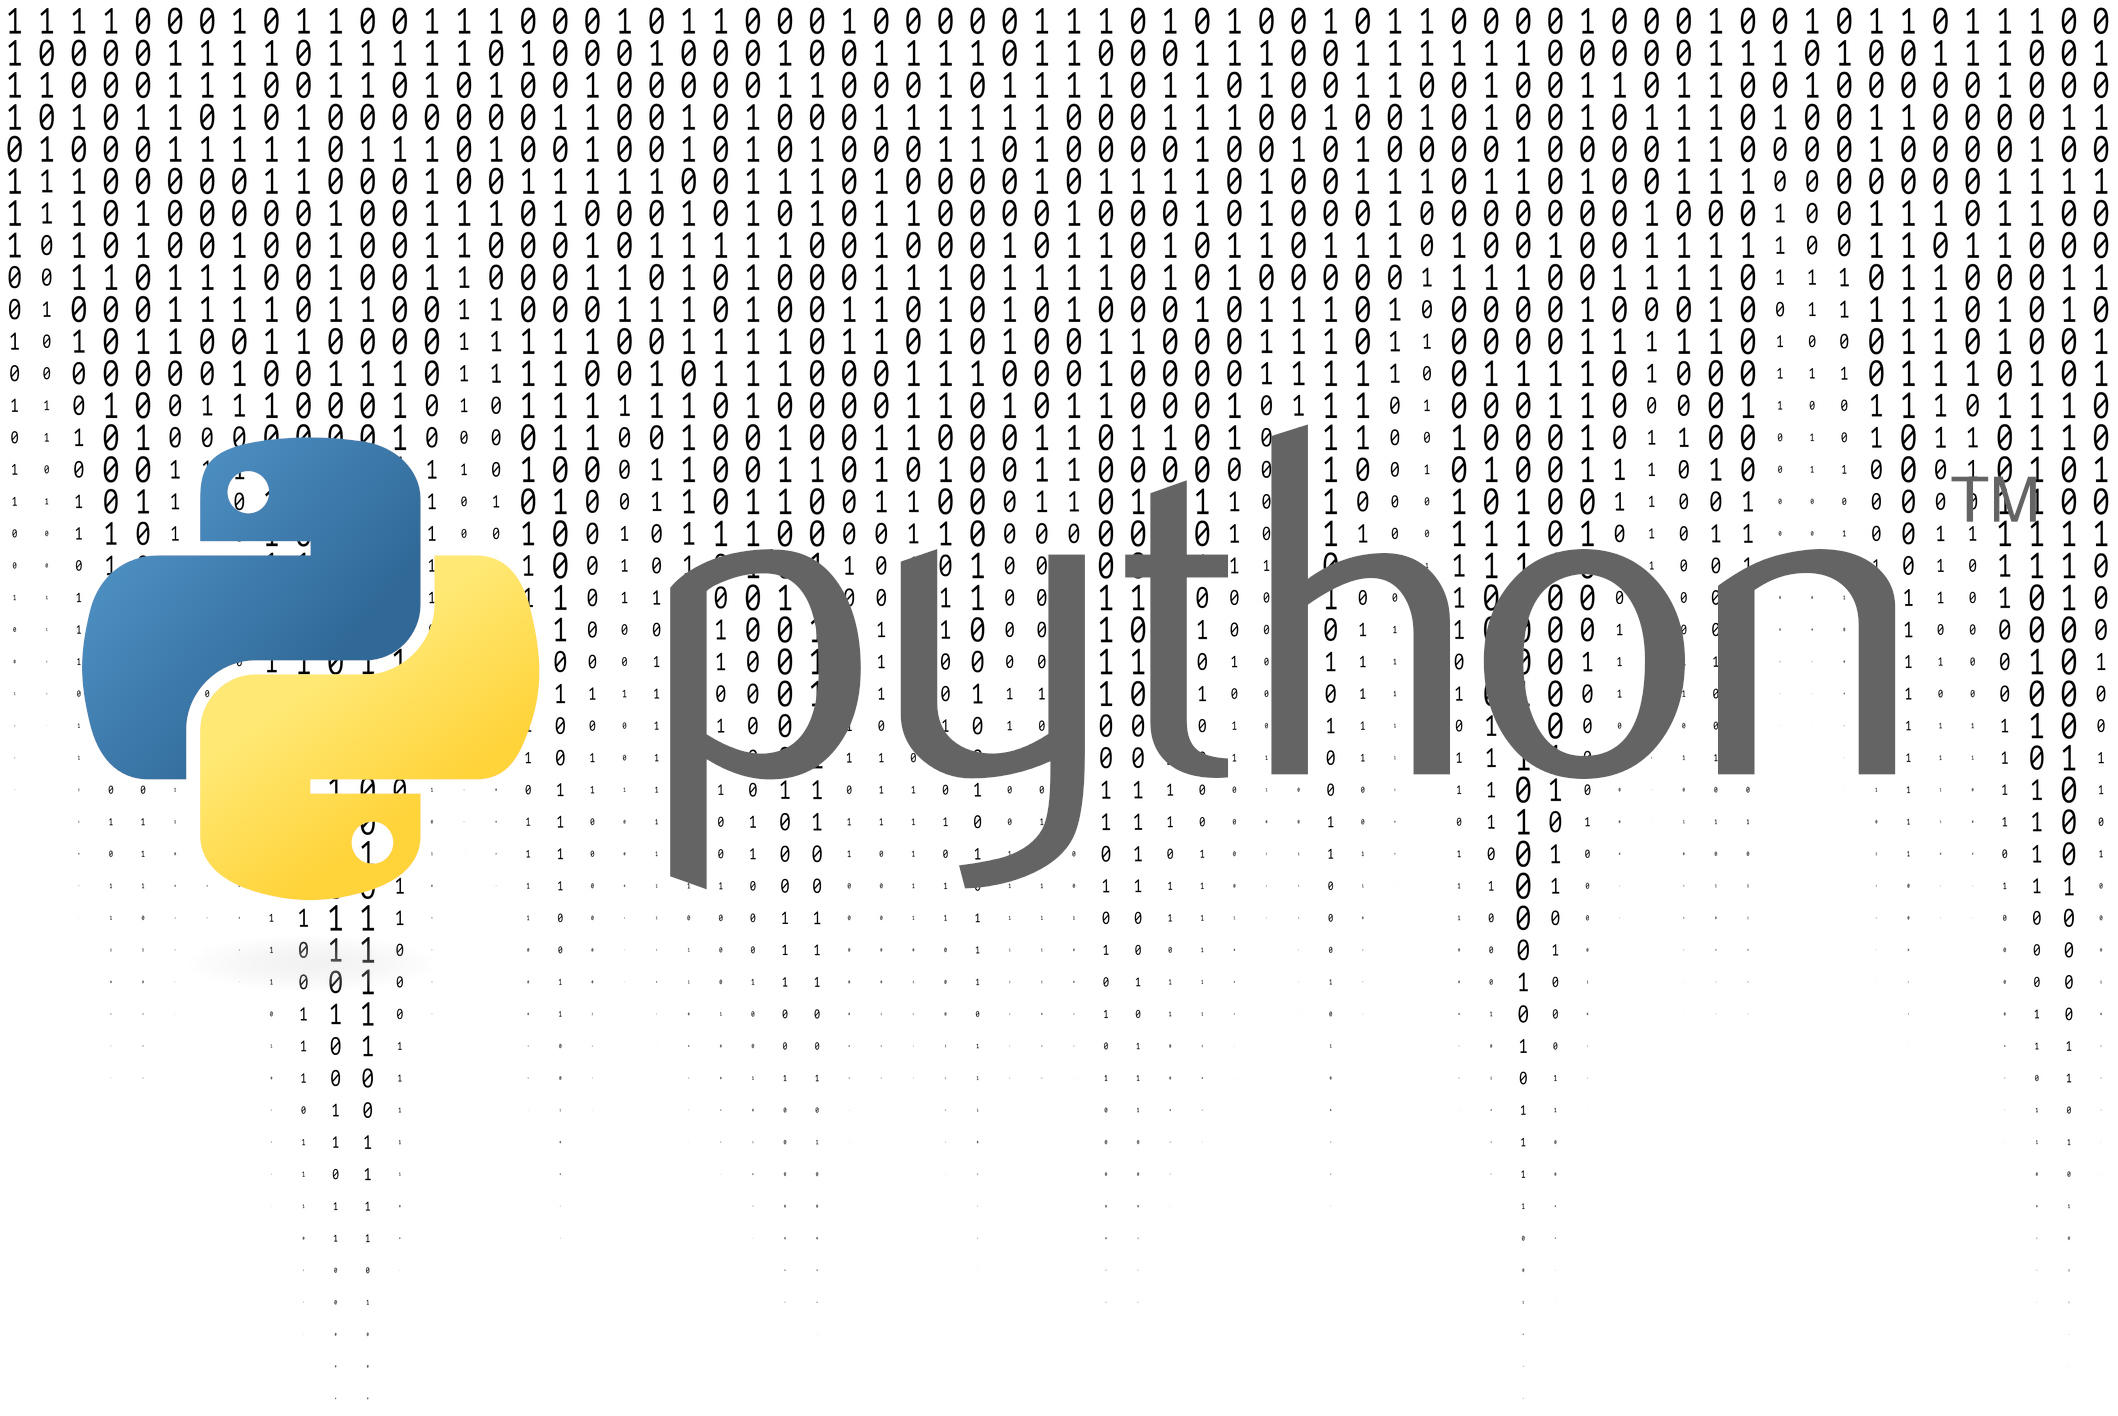 Microsoft is boosting its support for the Python programming ecosystem